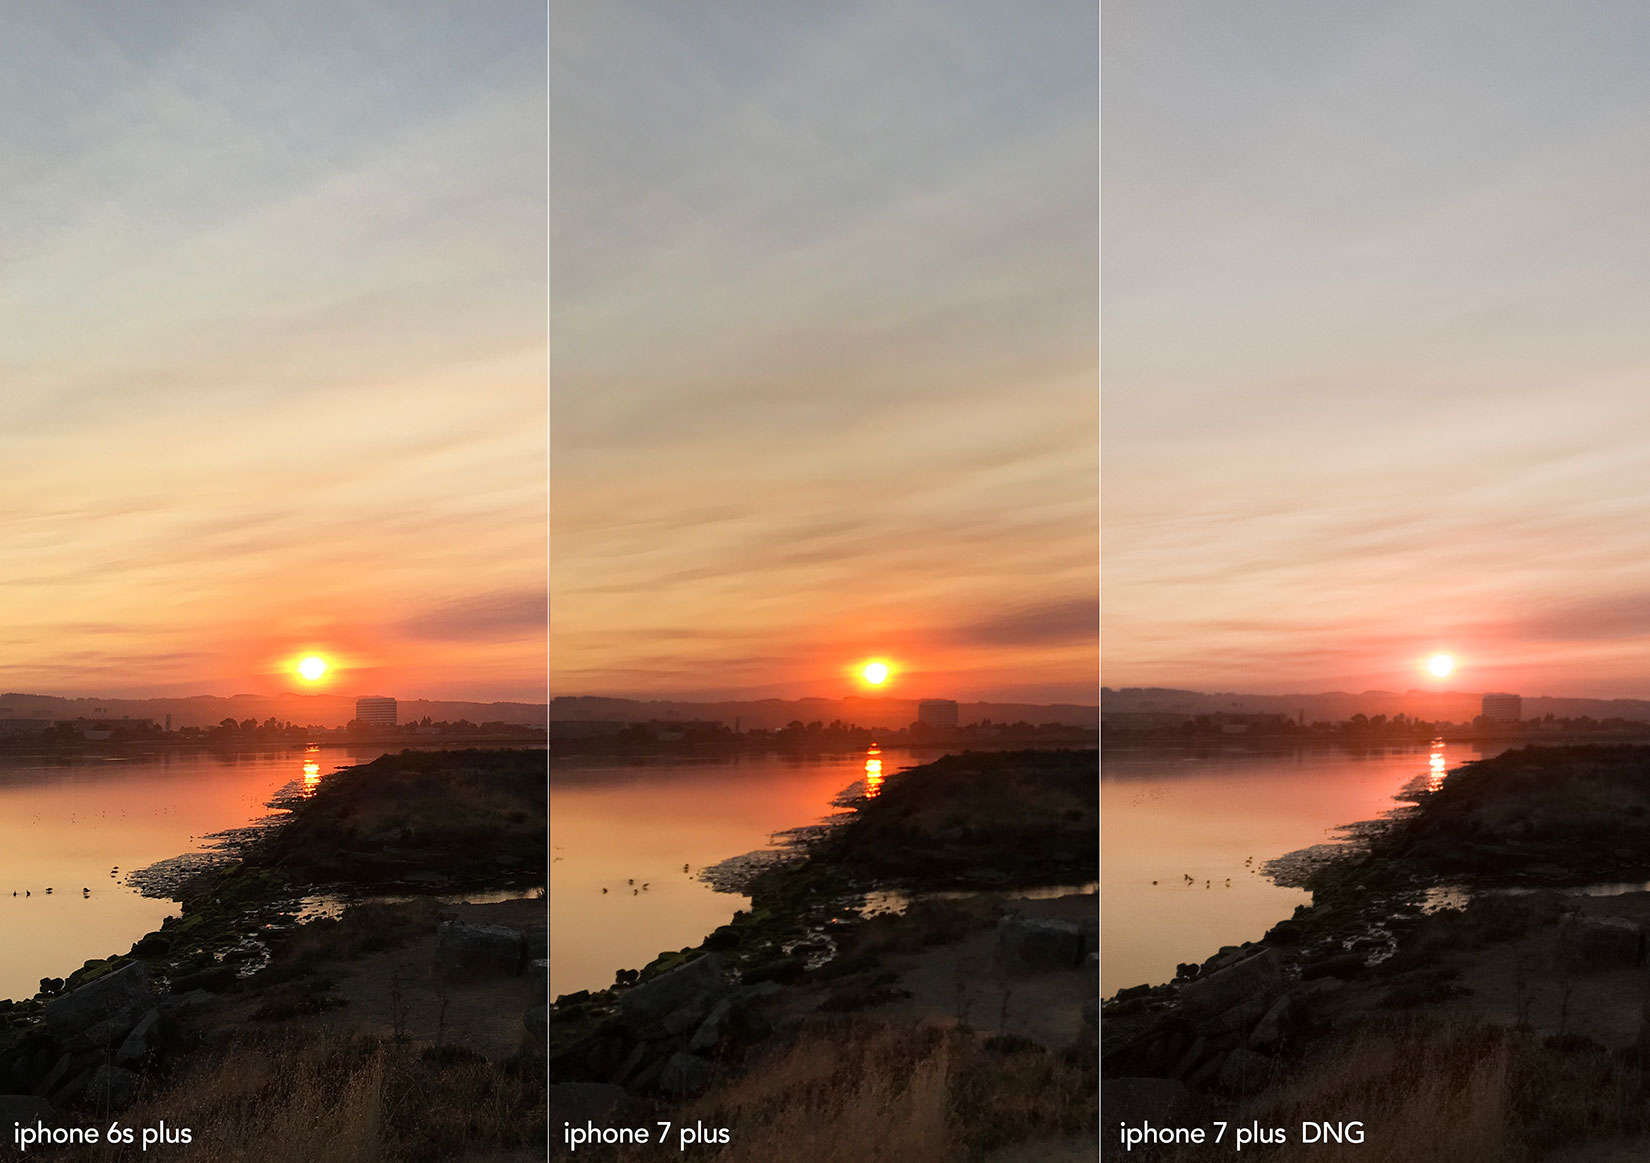 What makes a better sunrise, the iPhone 6s Plus or the iPhone 7s Plus? The photographer sees the difference.